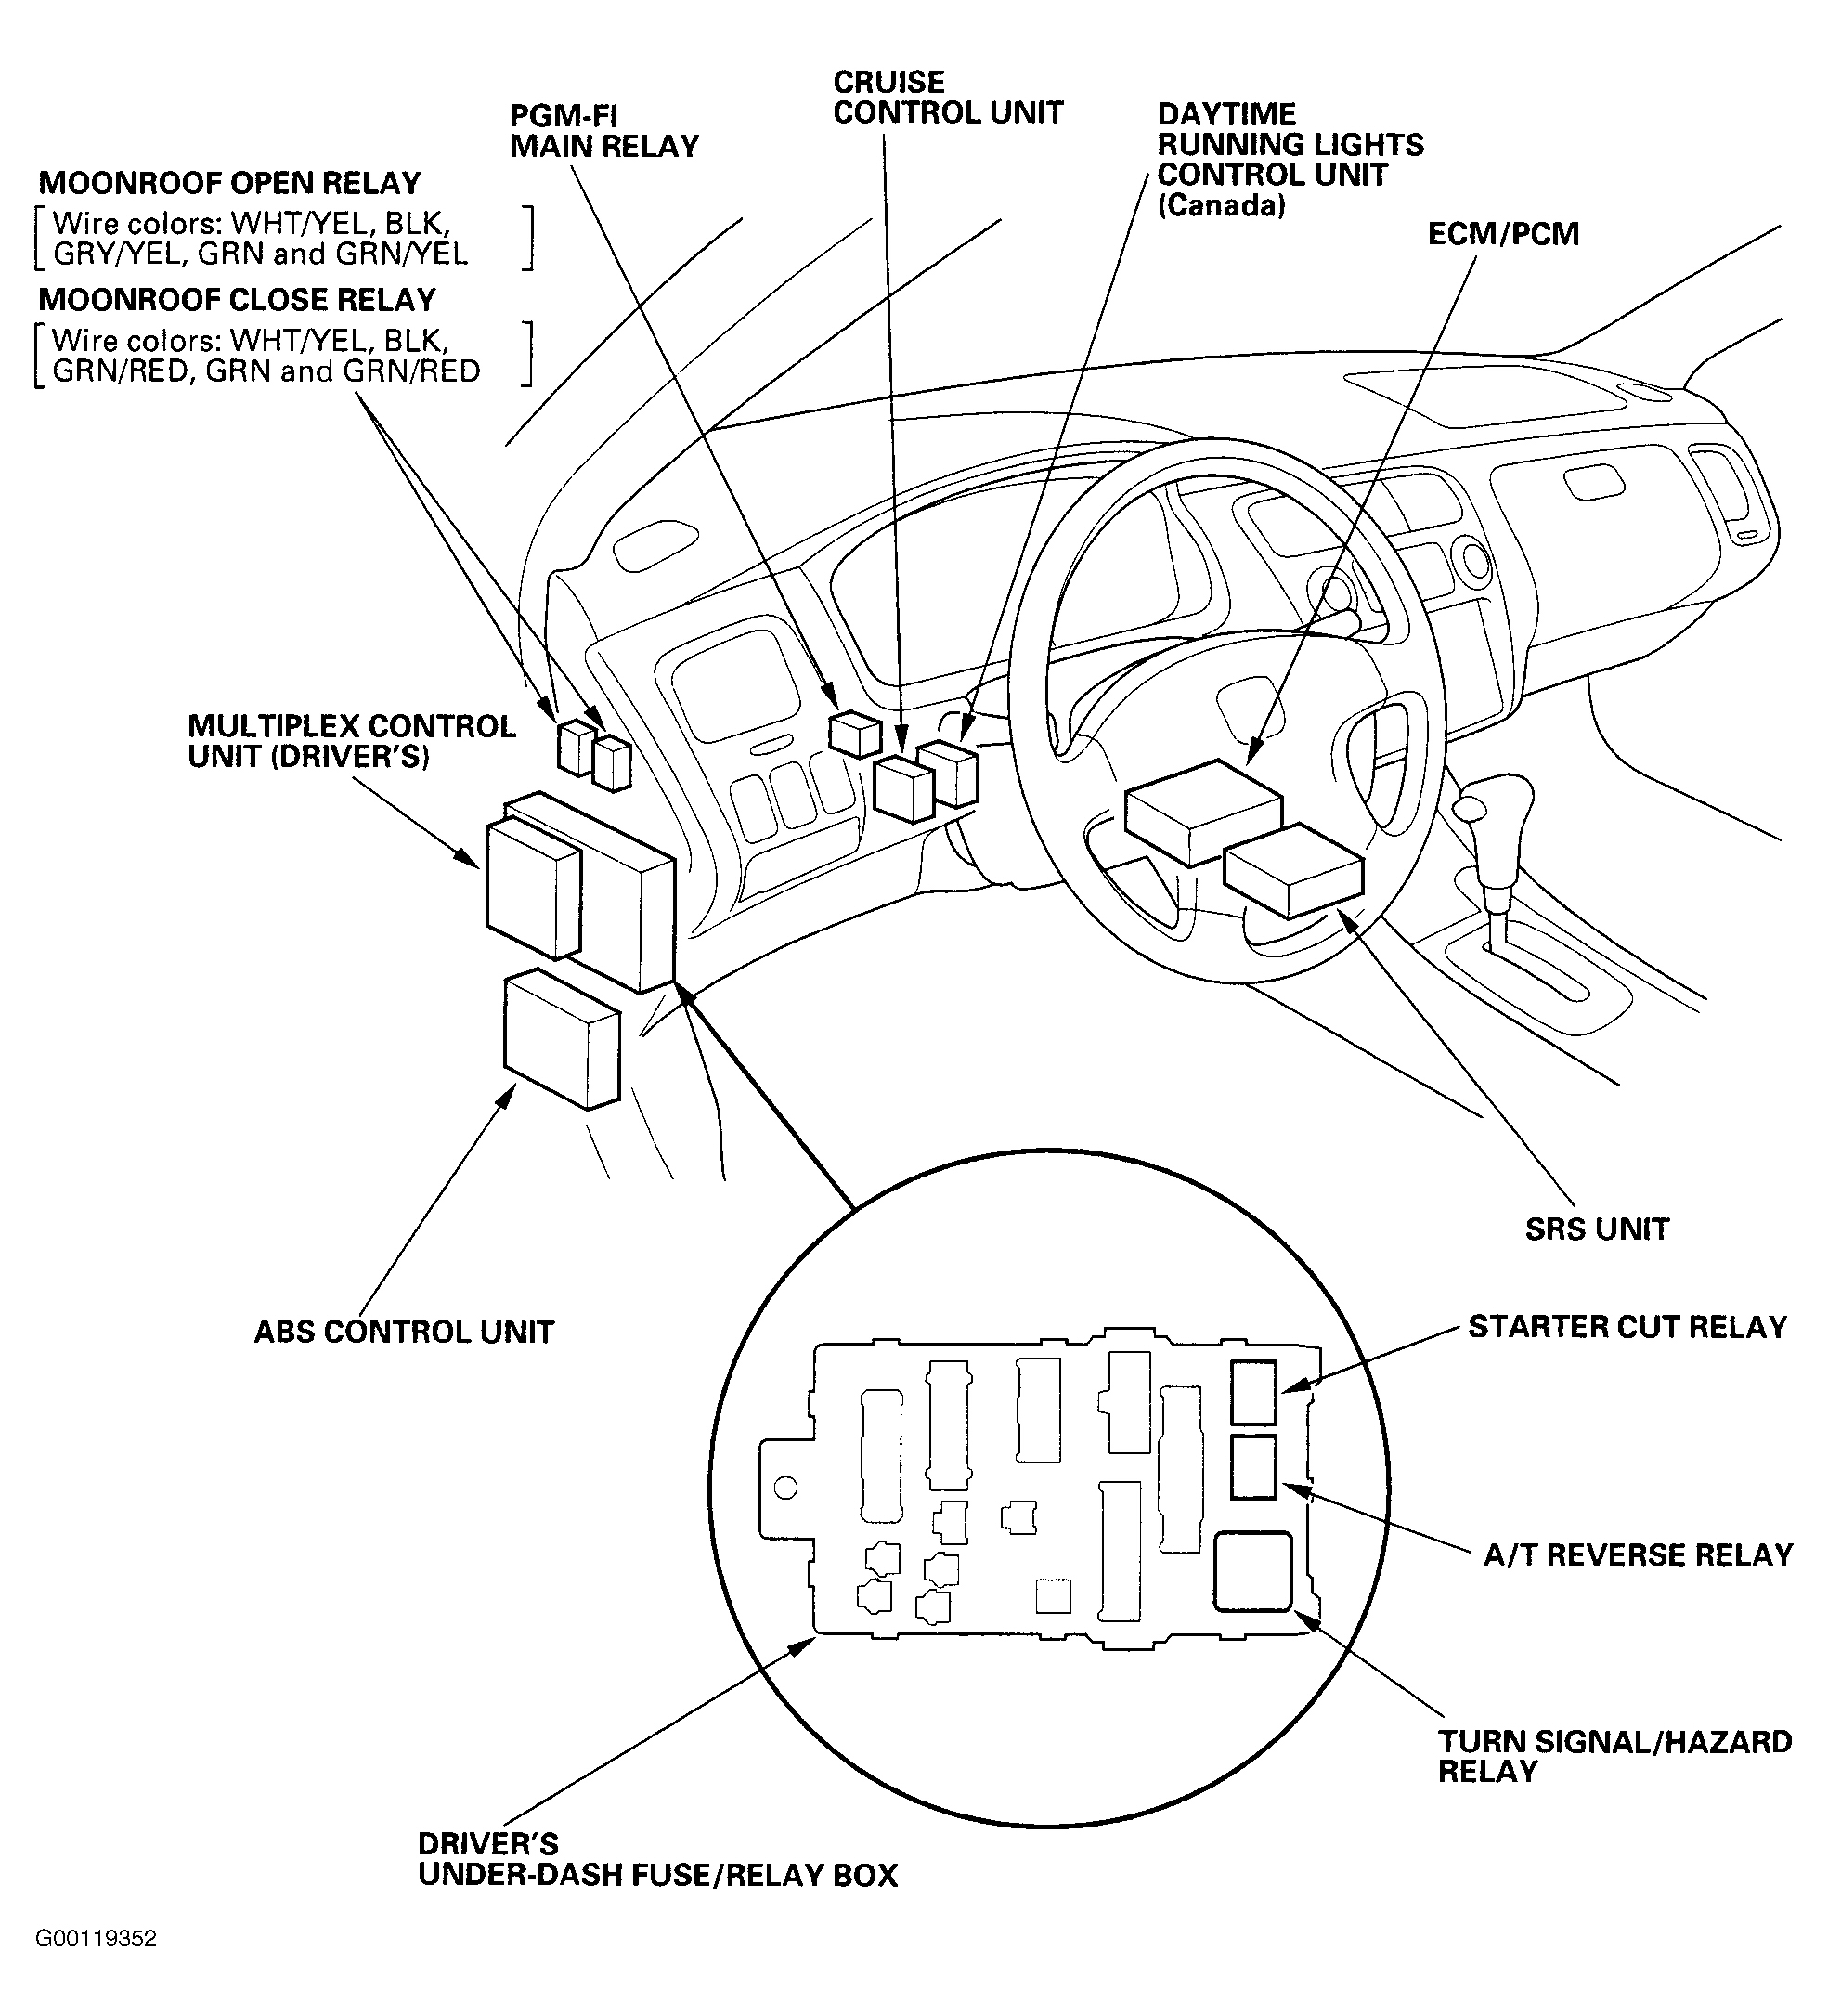 Honda Accord SE 2000 - Component Locations -  Locating Drivers Under-Dash Fuse/Relay Box (4-Cylinder)